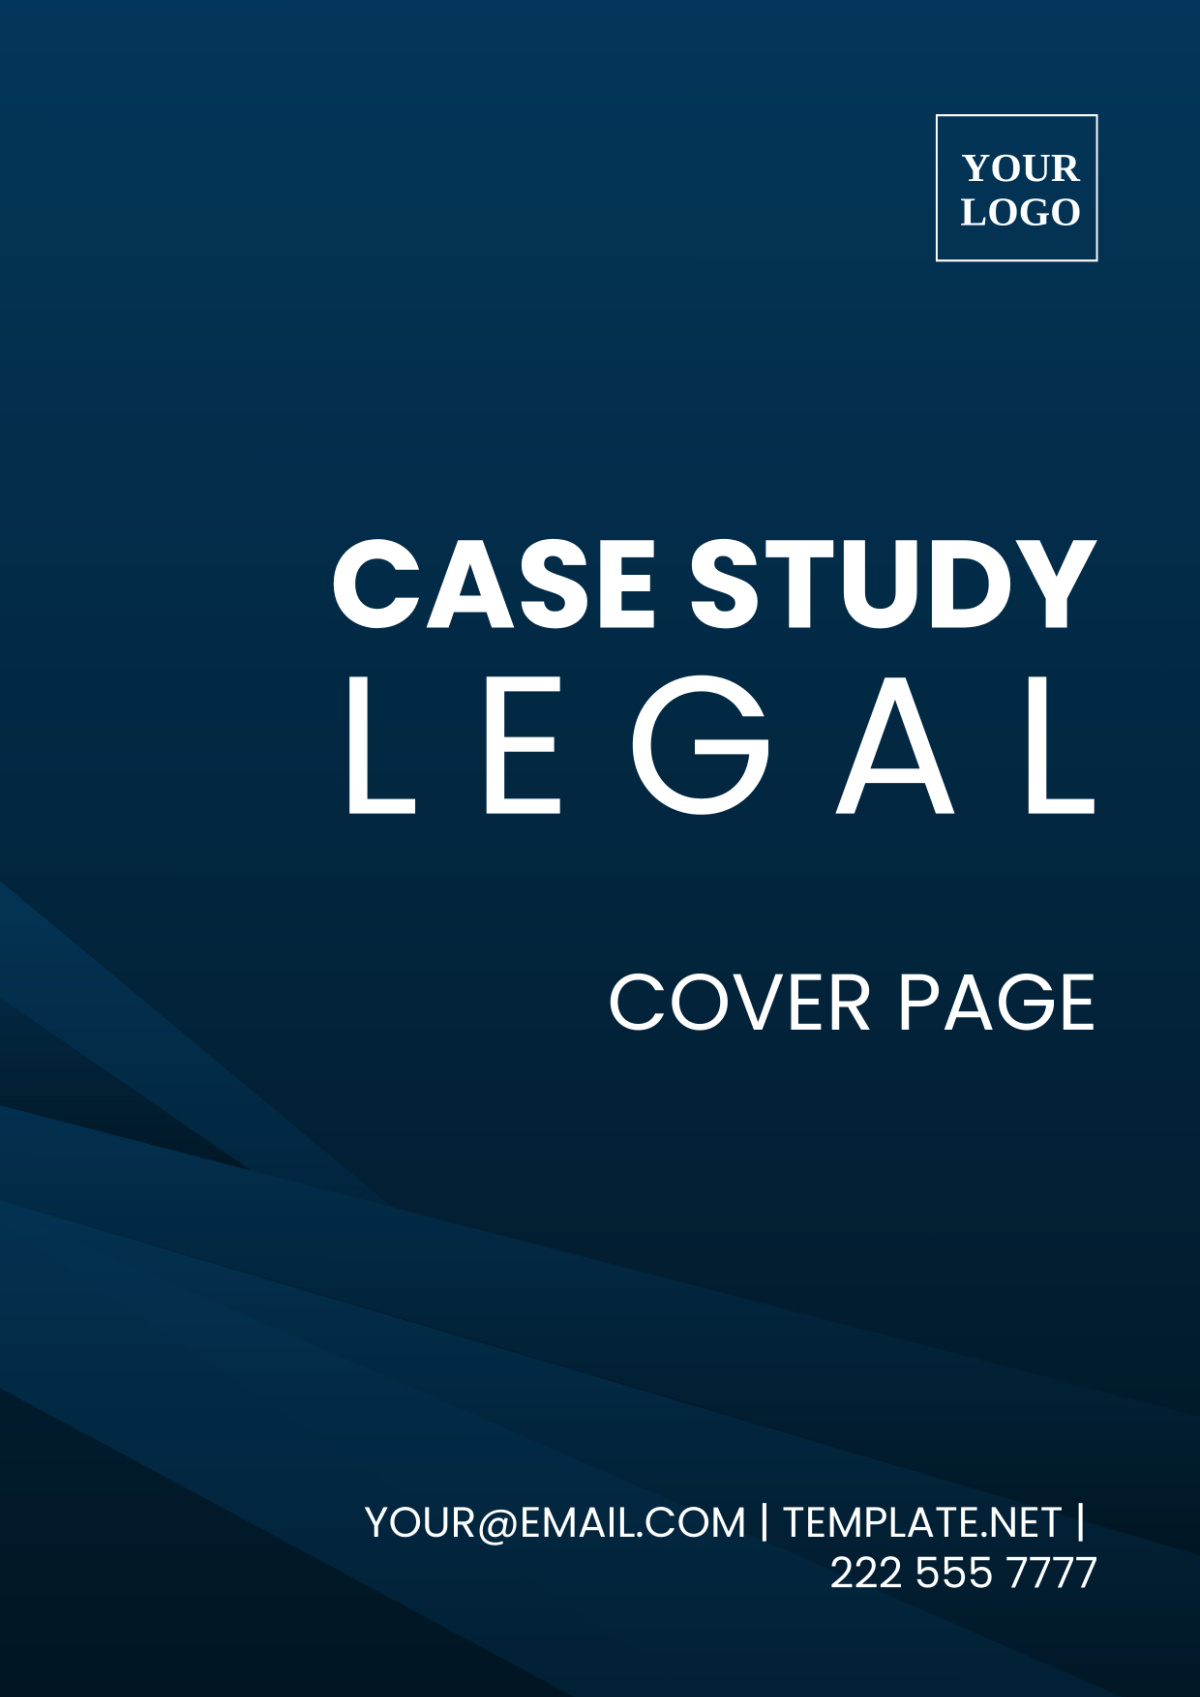 Case Study Legal Cover Page Template